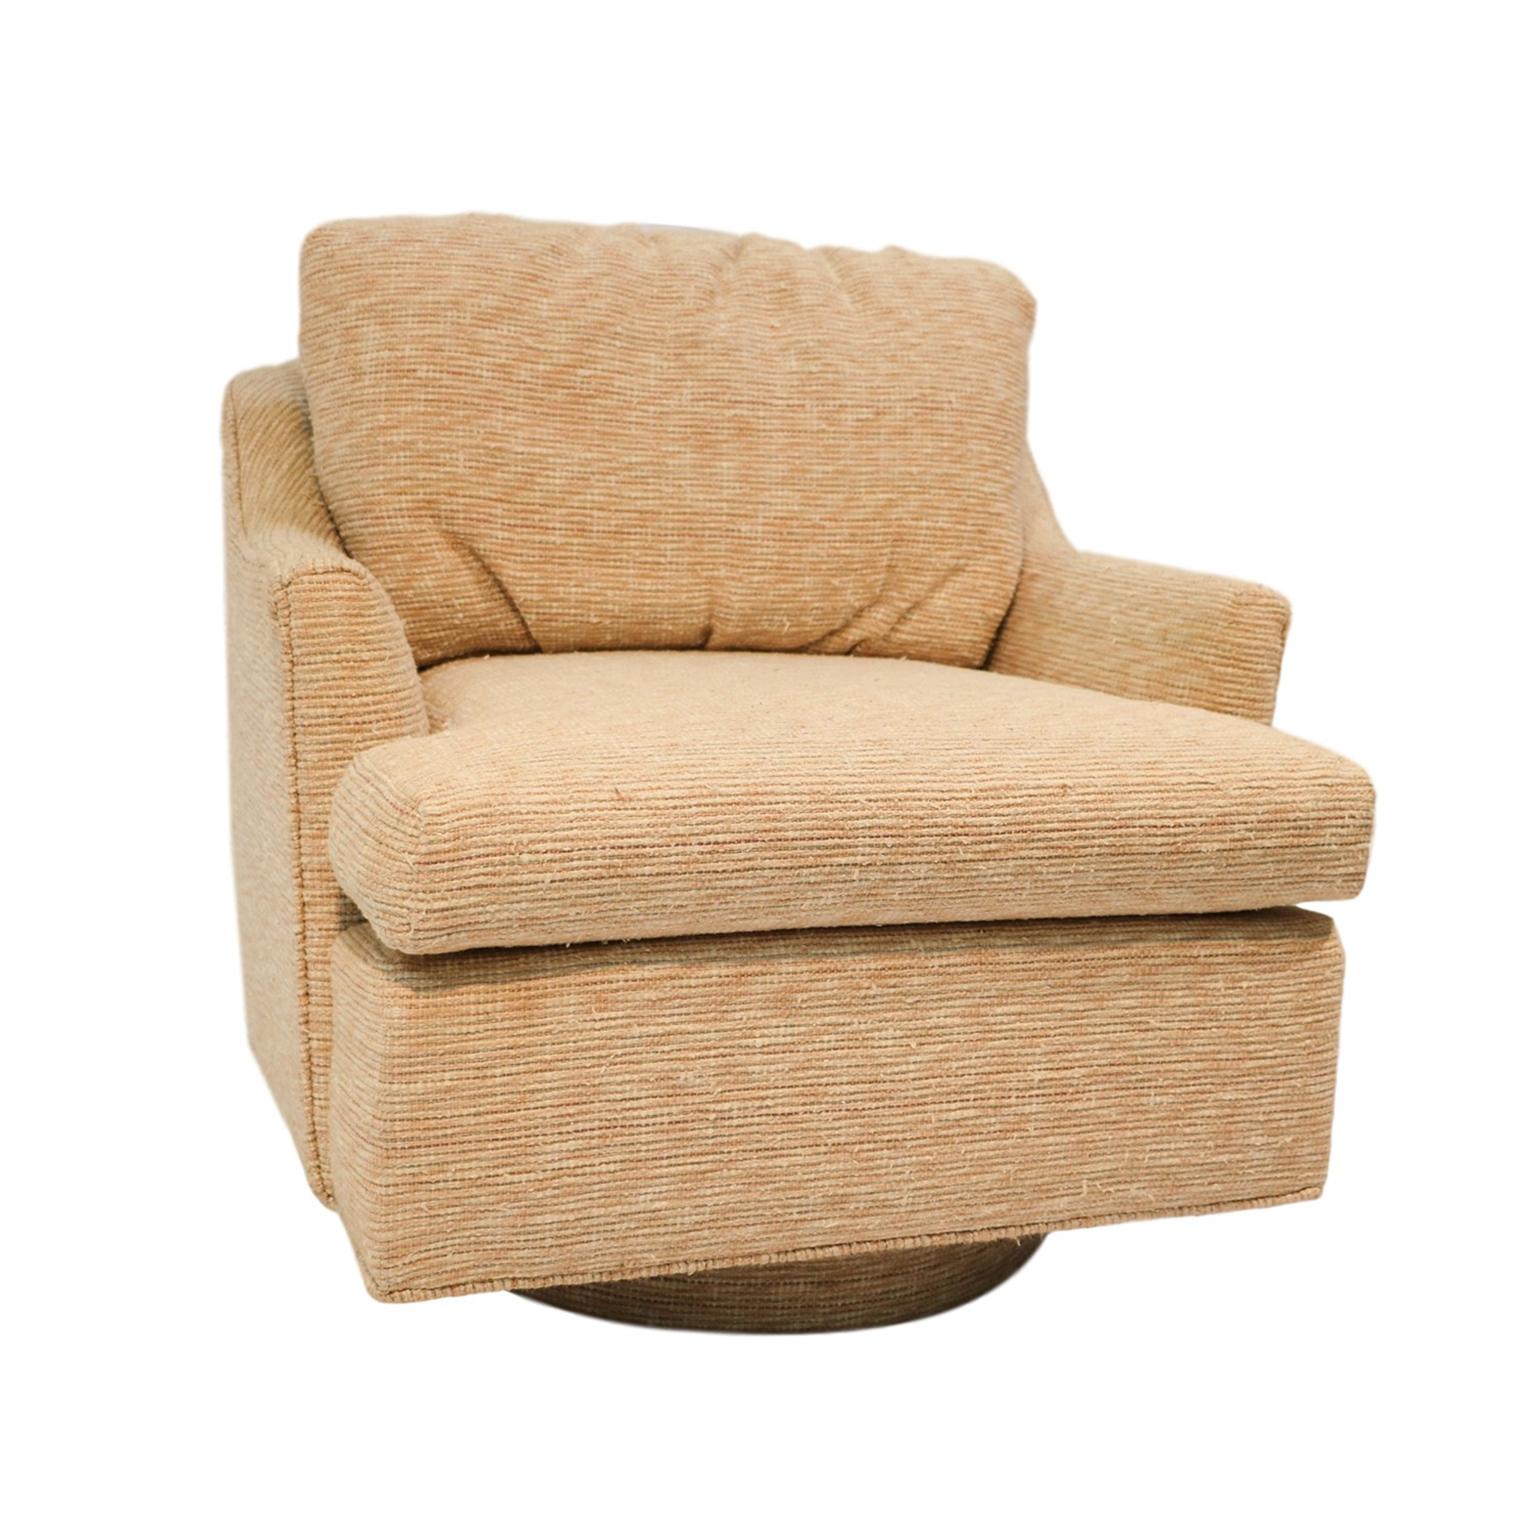 Superb multicolored woven textured lounge chair Milo Baughman style, barrel tub swivel armchair. Features loose cushions supported by a curved back on a square seat with swivel fitting underneath. Retains clean original fabric with original circular